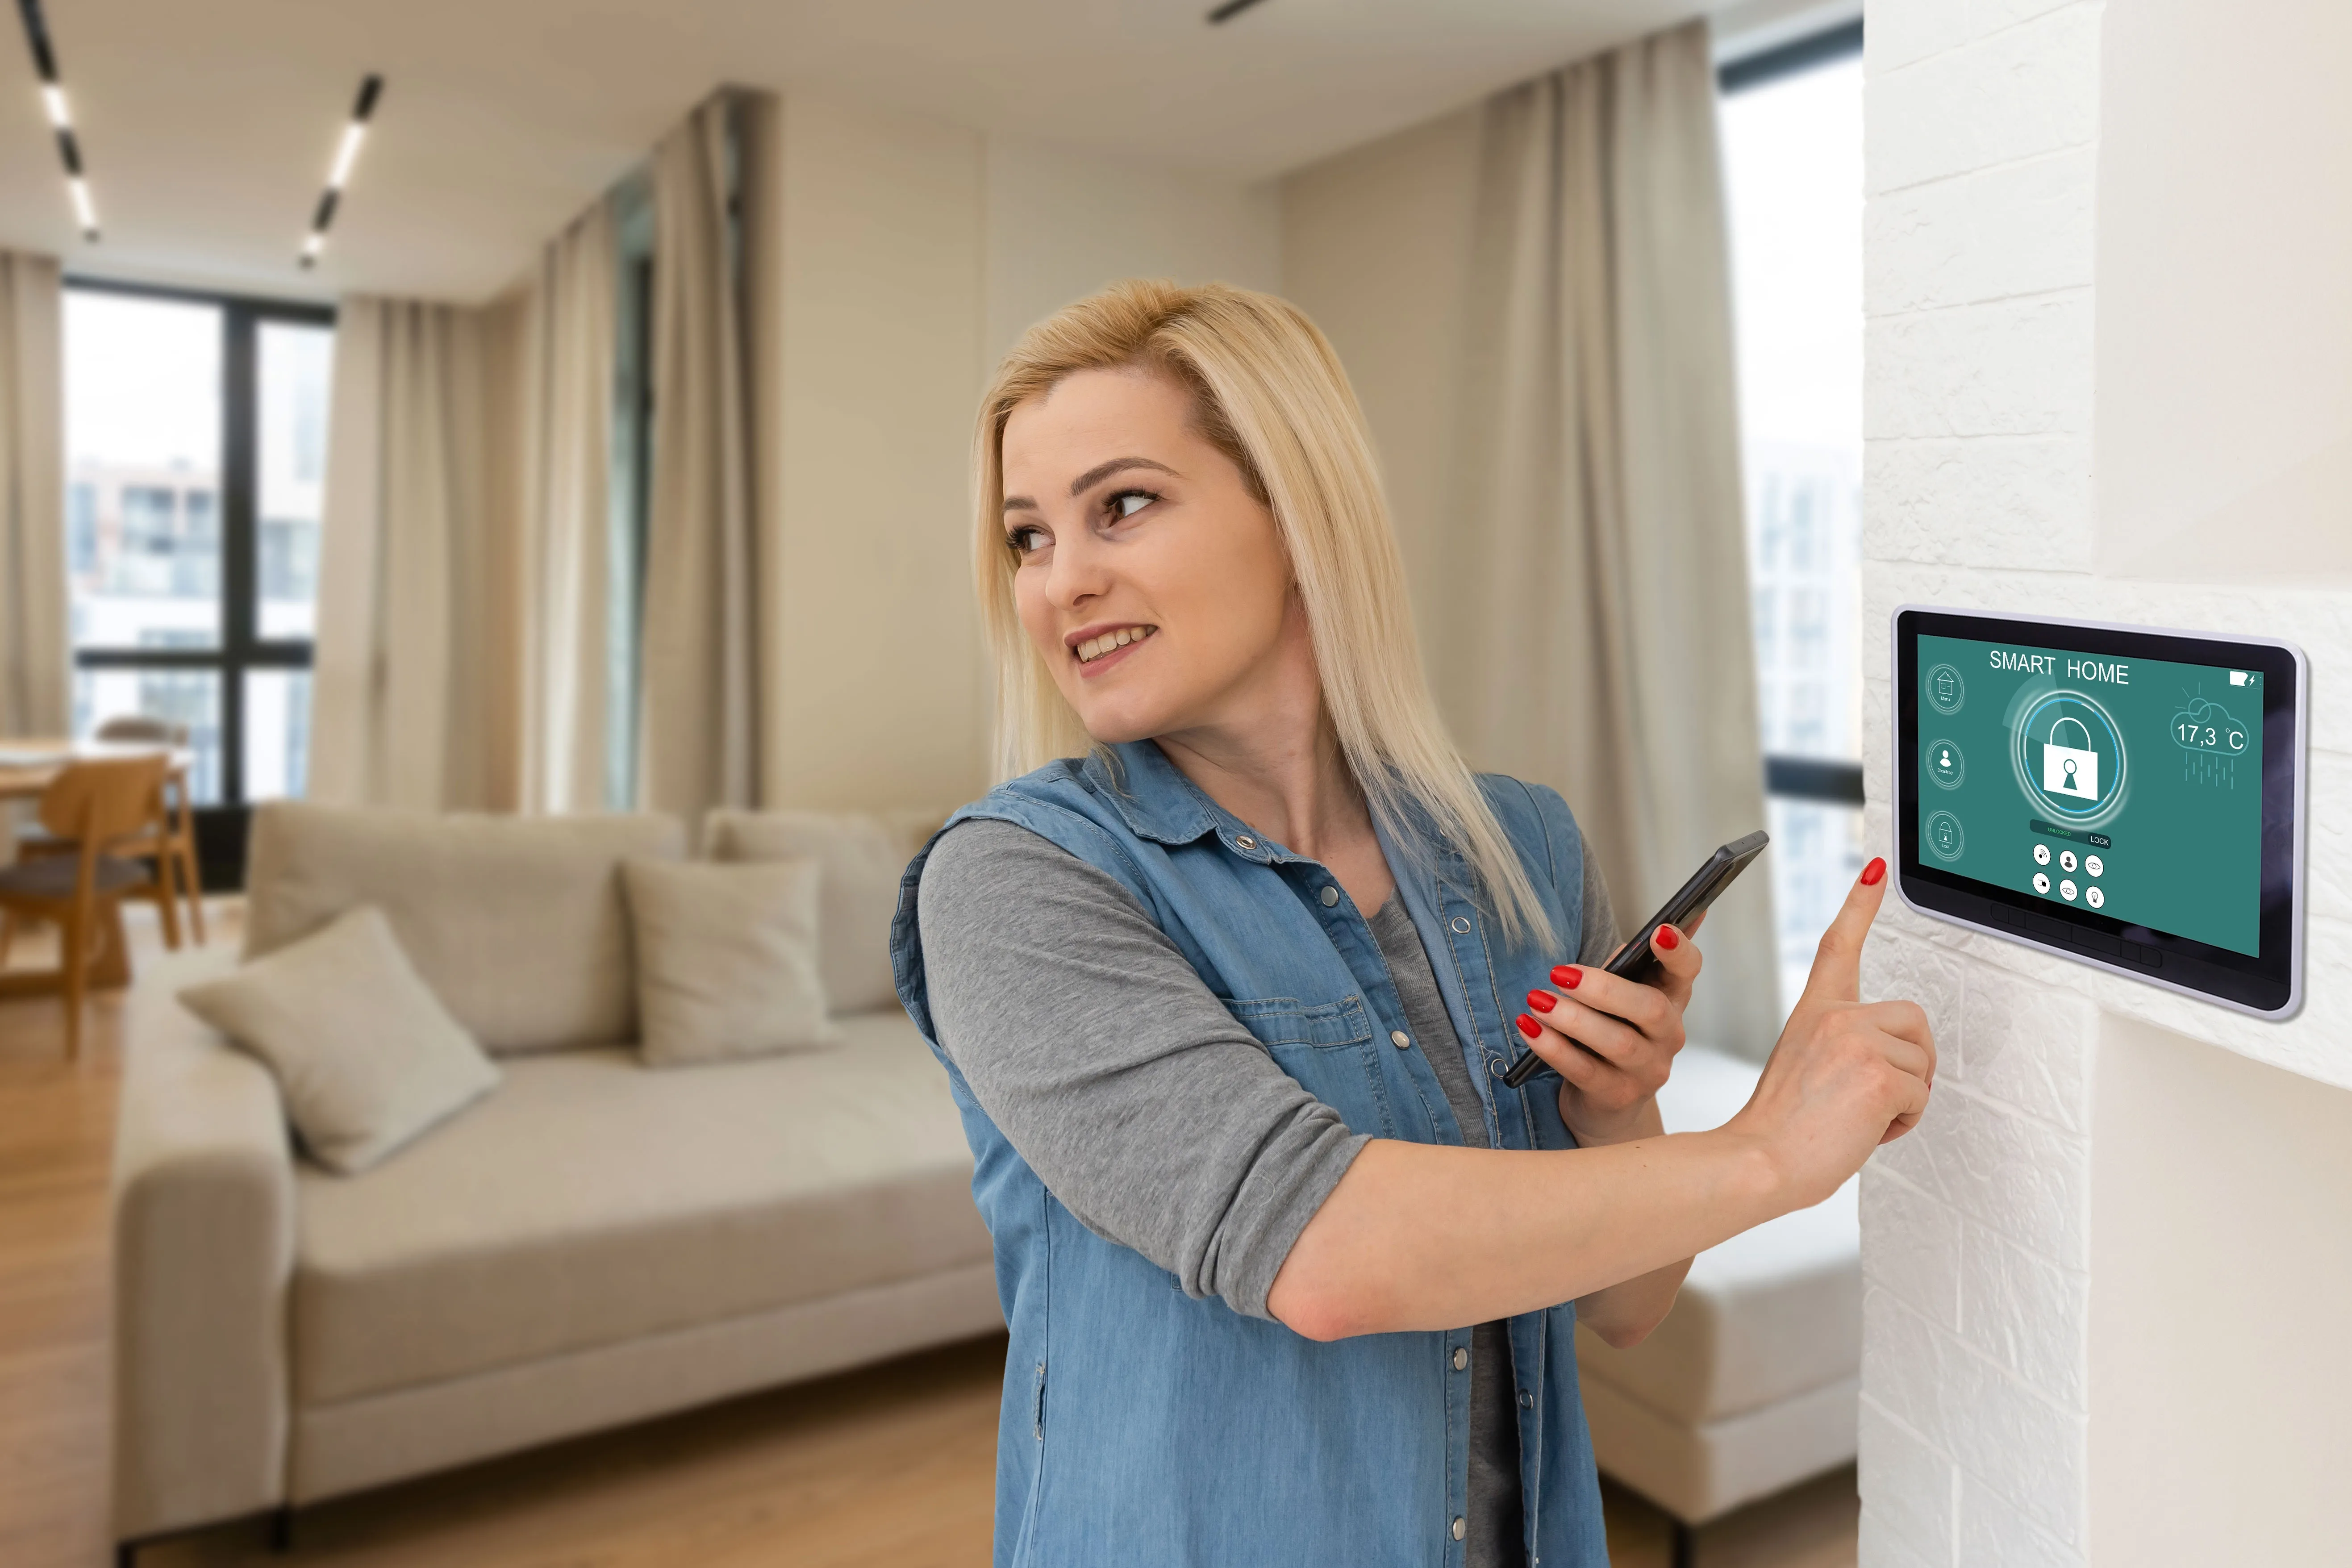 How to Set Up a Smart Home